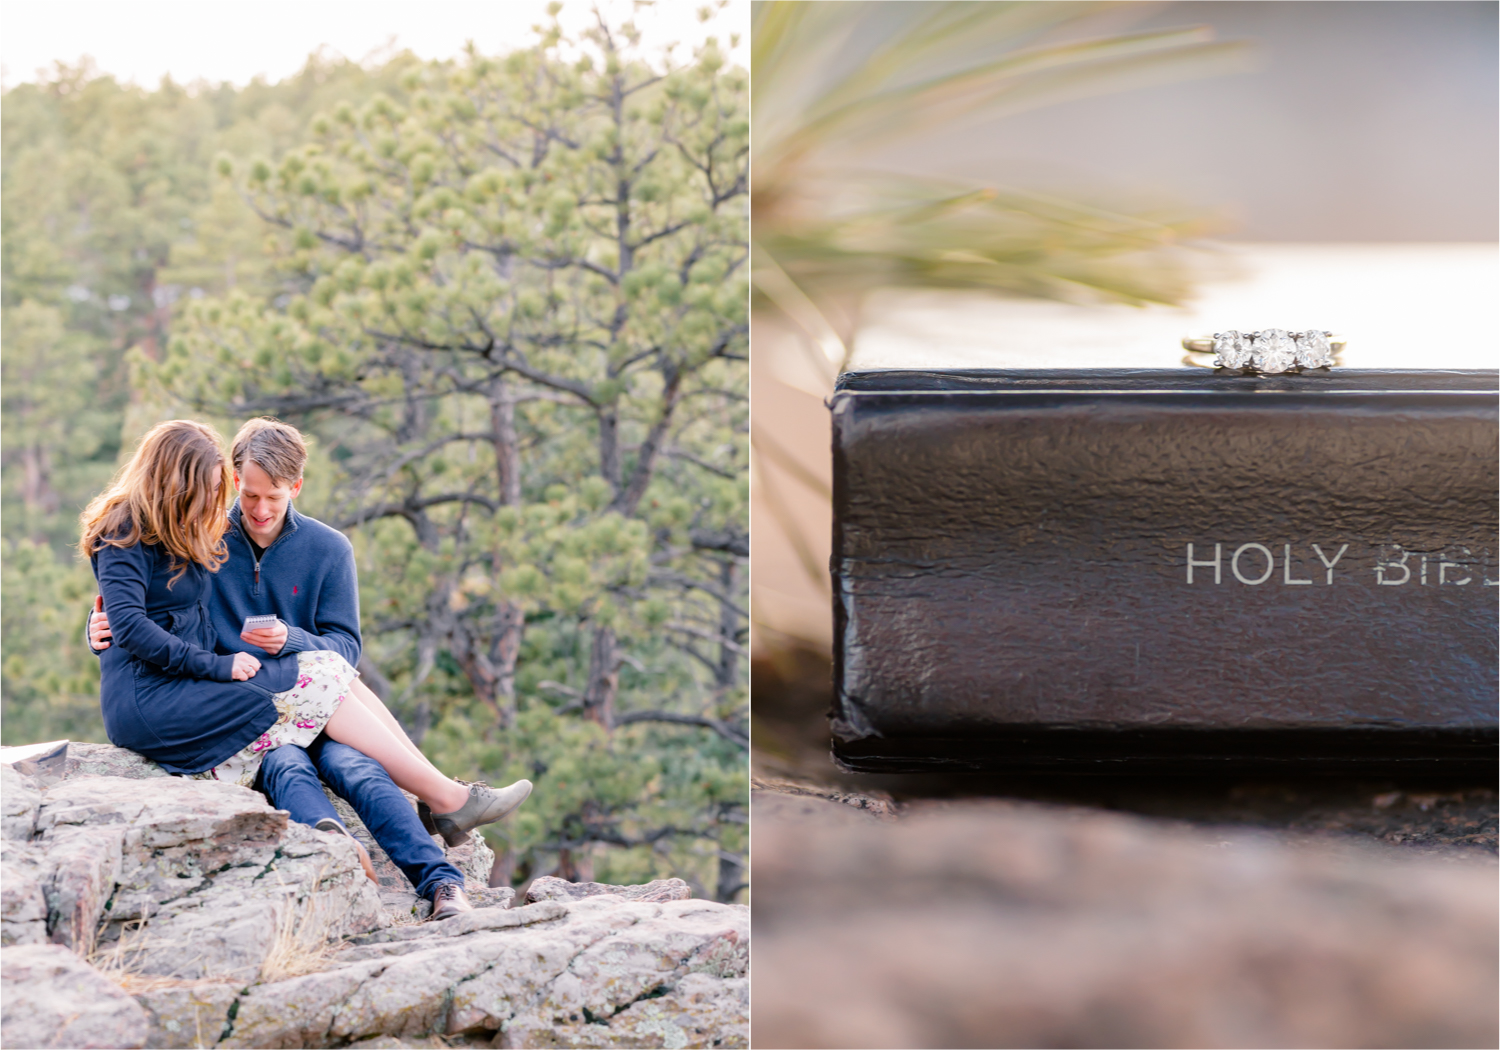 Winter Engagement on Lookout Mountain in Golden Colorado | Britni Girard Photography | Destination Photo and Video Team | Engagement Ring and Bible. Epic views of Golden, dreamy sunsets, dancing and snuggles.  A sweet couple shares time of prayer together during their romantic engagement session.